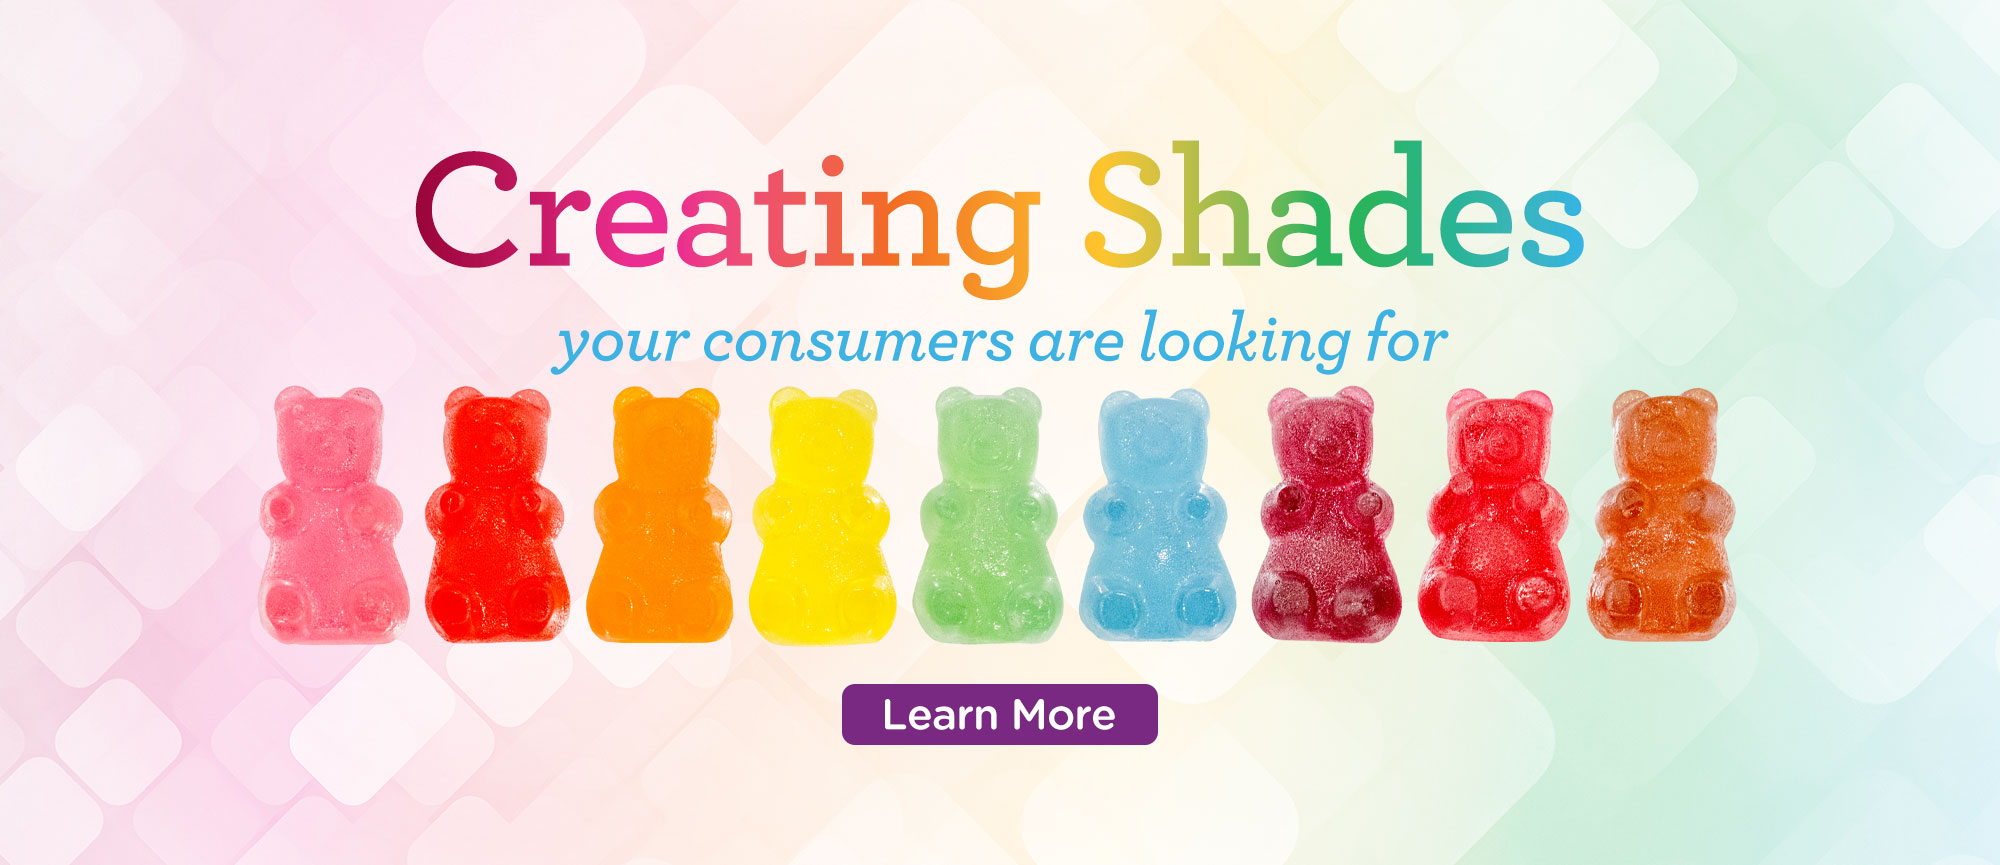 Creating Shades your Consumers Are Looking For